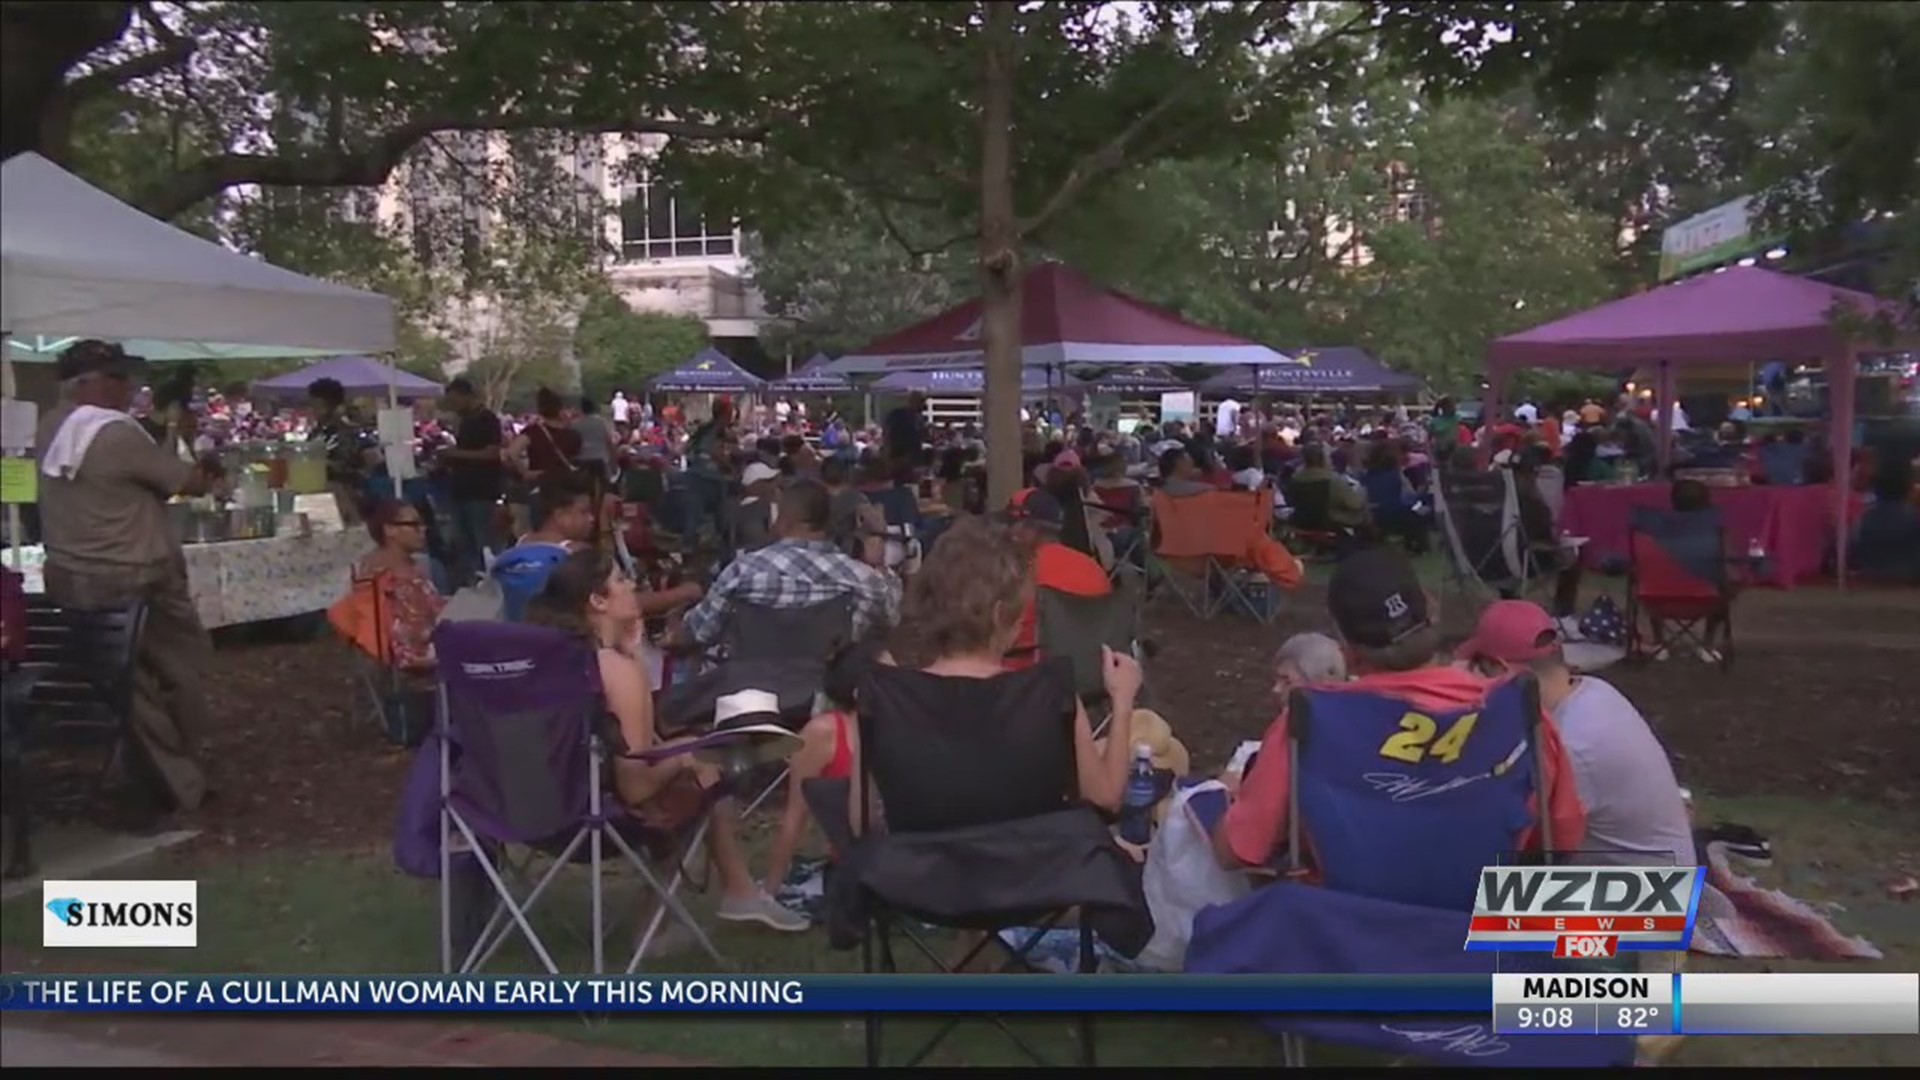 The sound of jazz is in the air at Big Spring Park, where people in Huntsville came together to listen to live music.